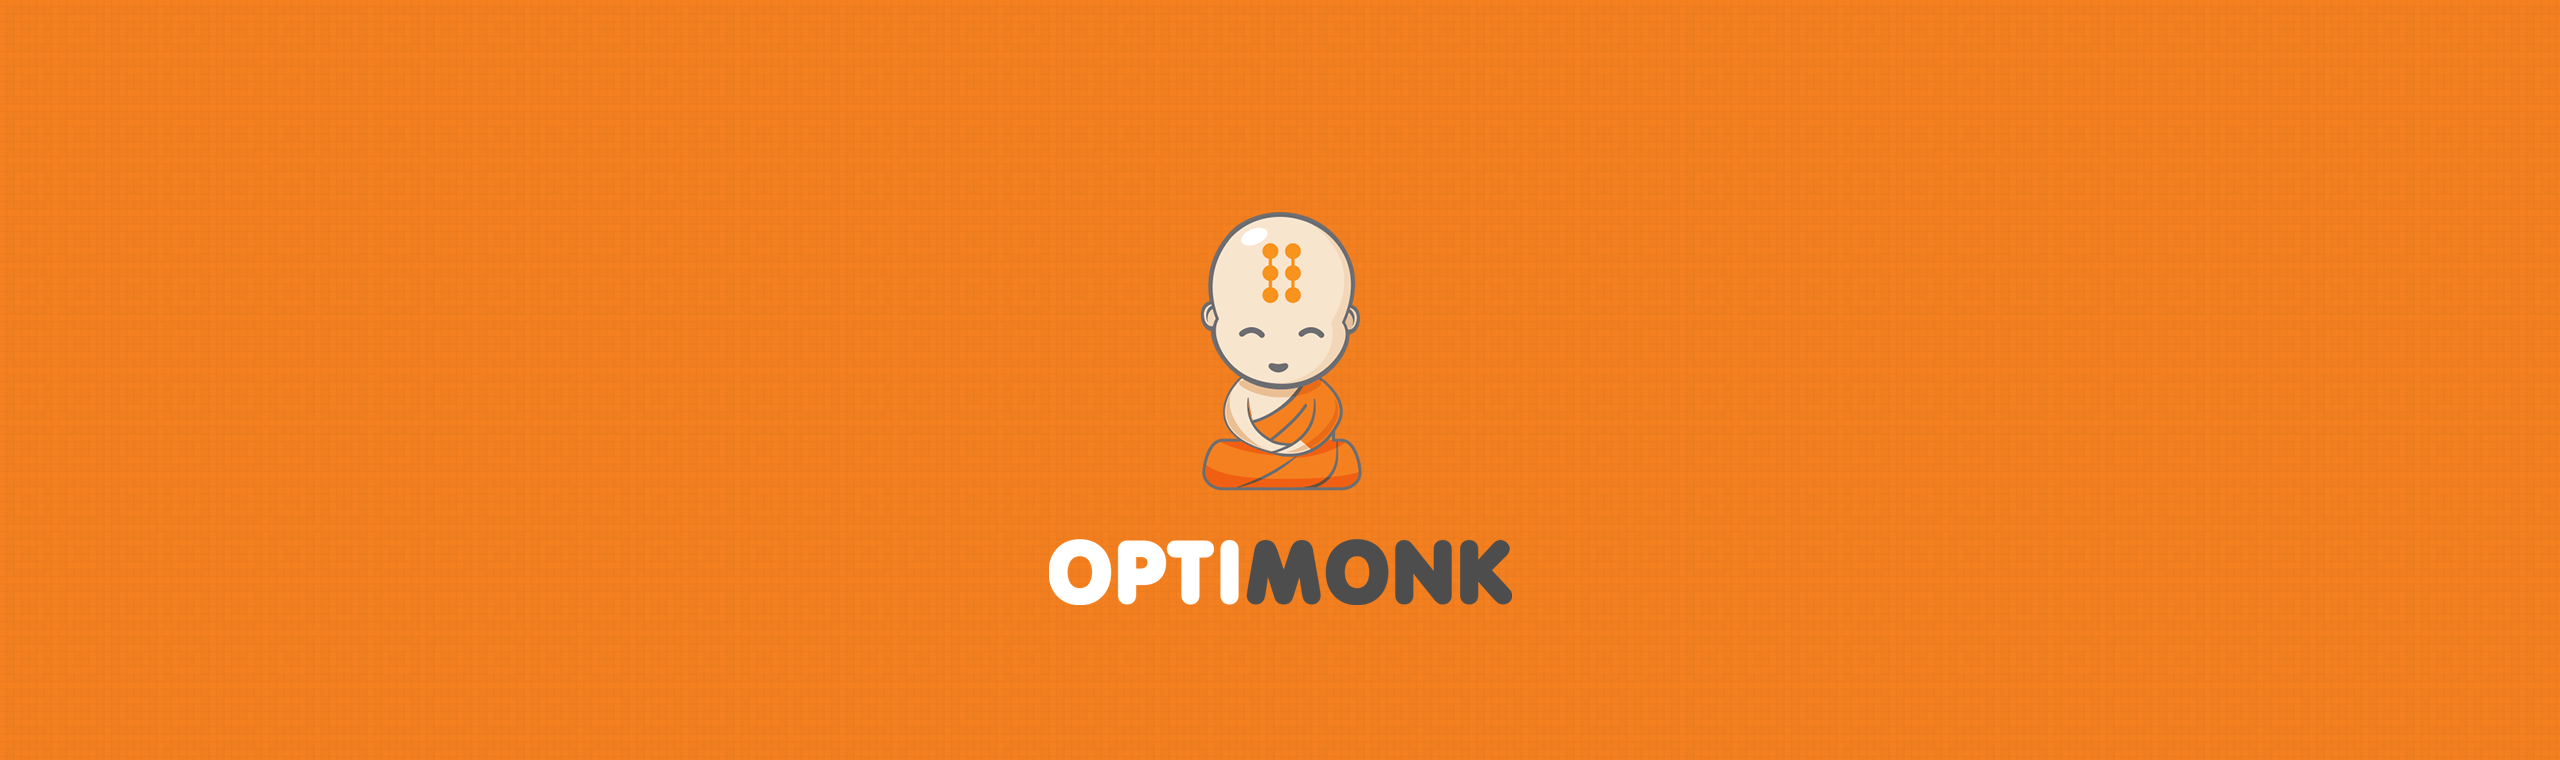 Use Optimonk for on site retargeting to generate leads